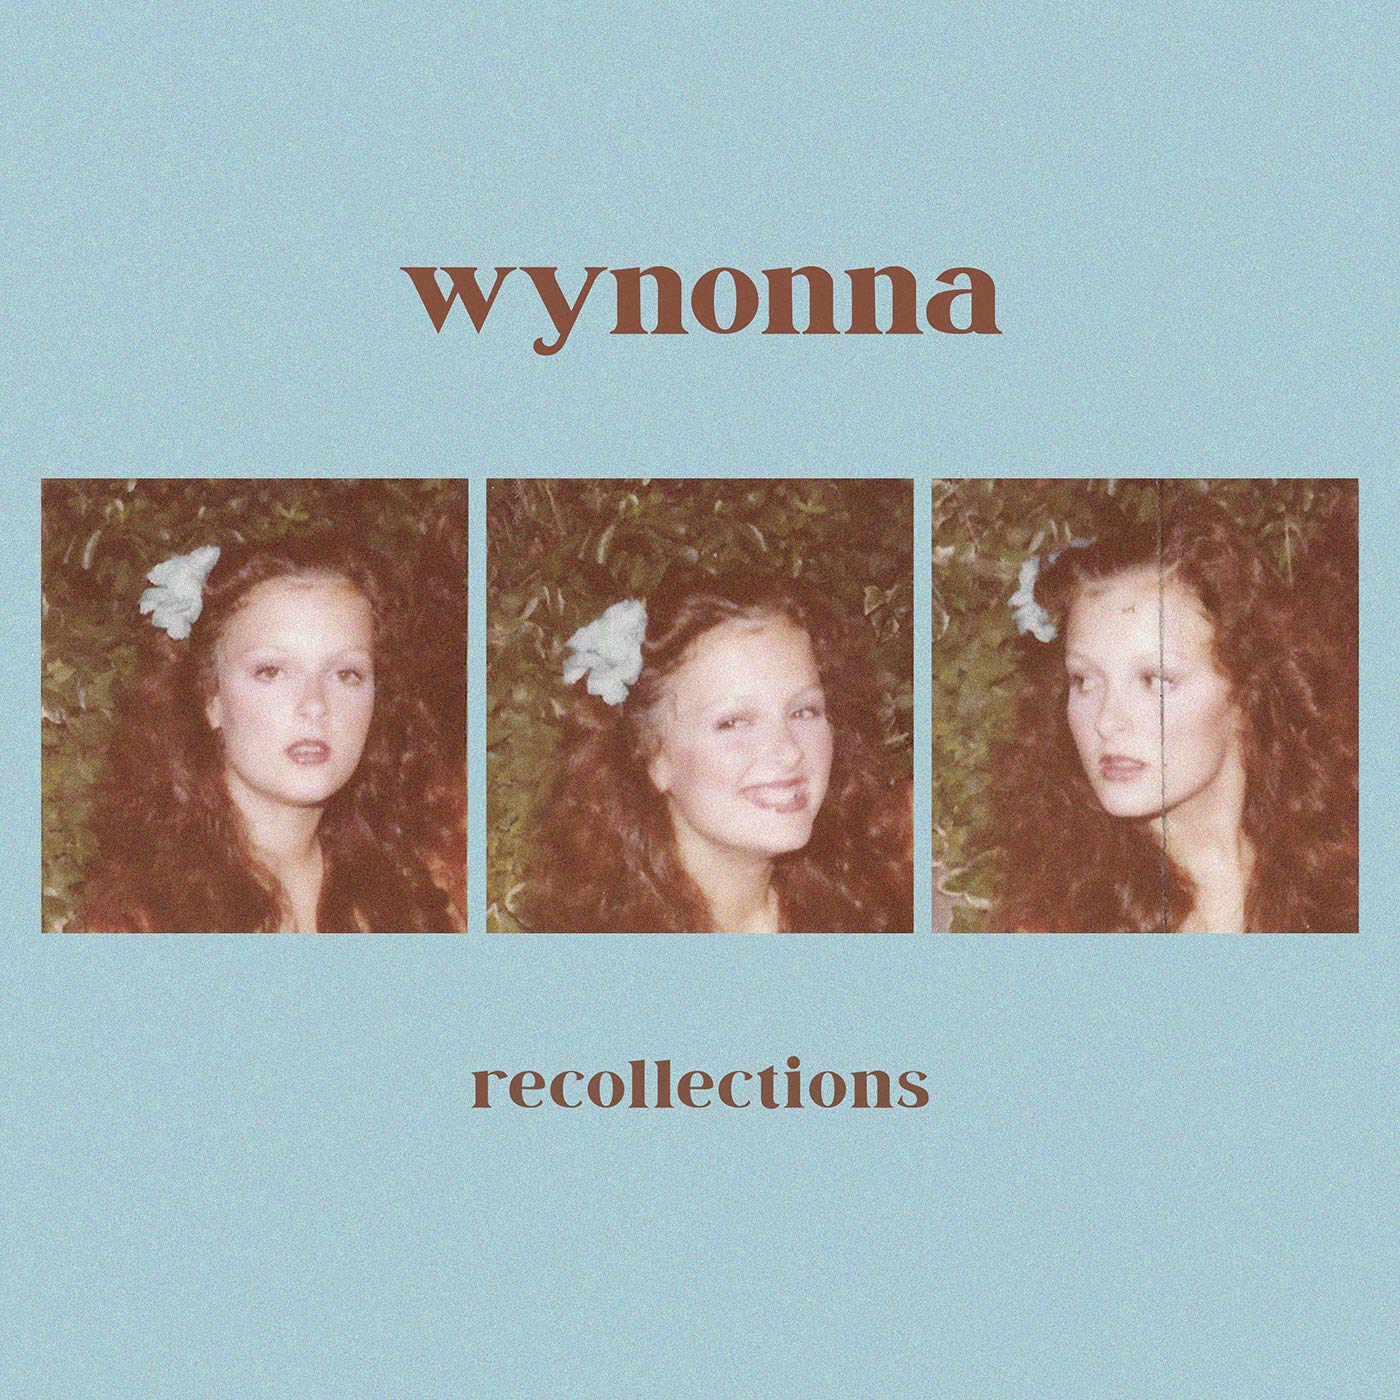 Wynonna – Recollections (2020) [FLAC 24bit/96kHz]